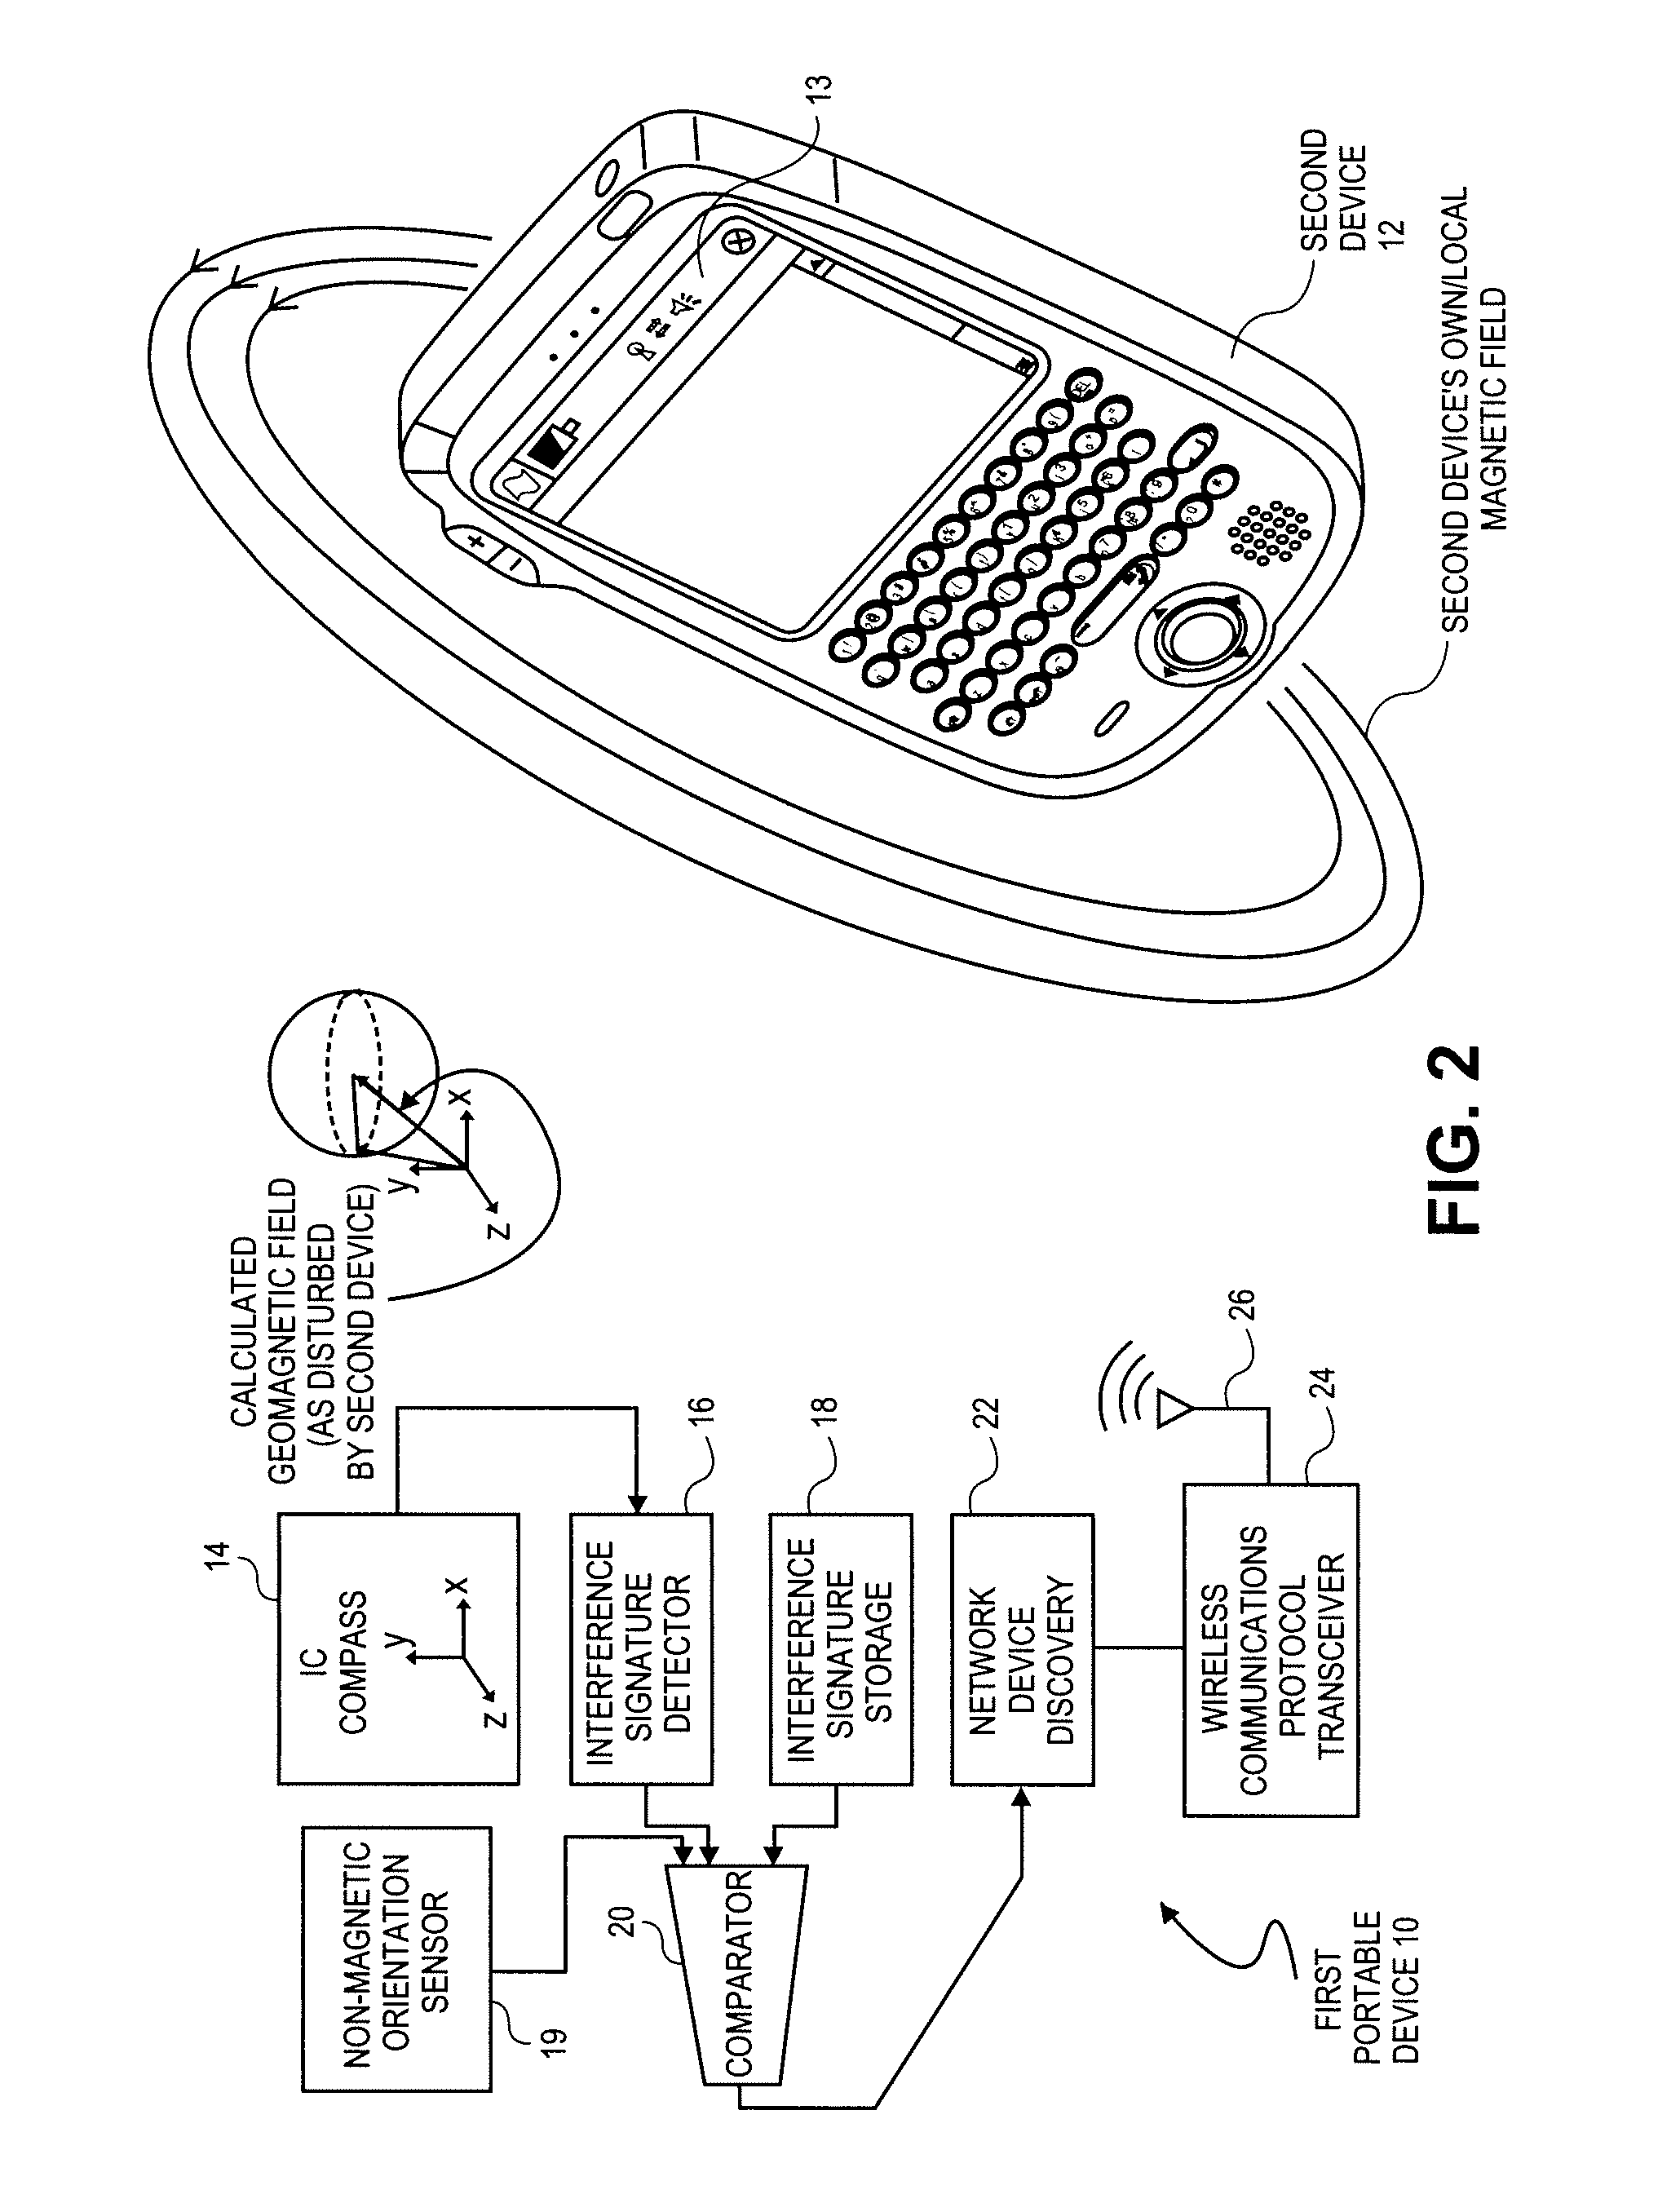 Method and apparatus for triggering network device discovery